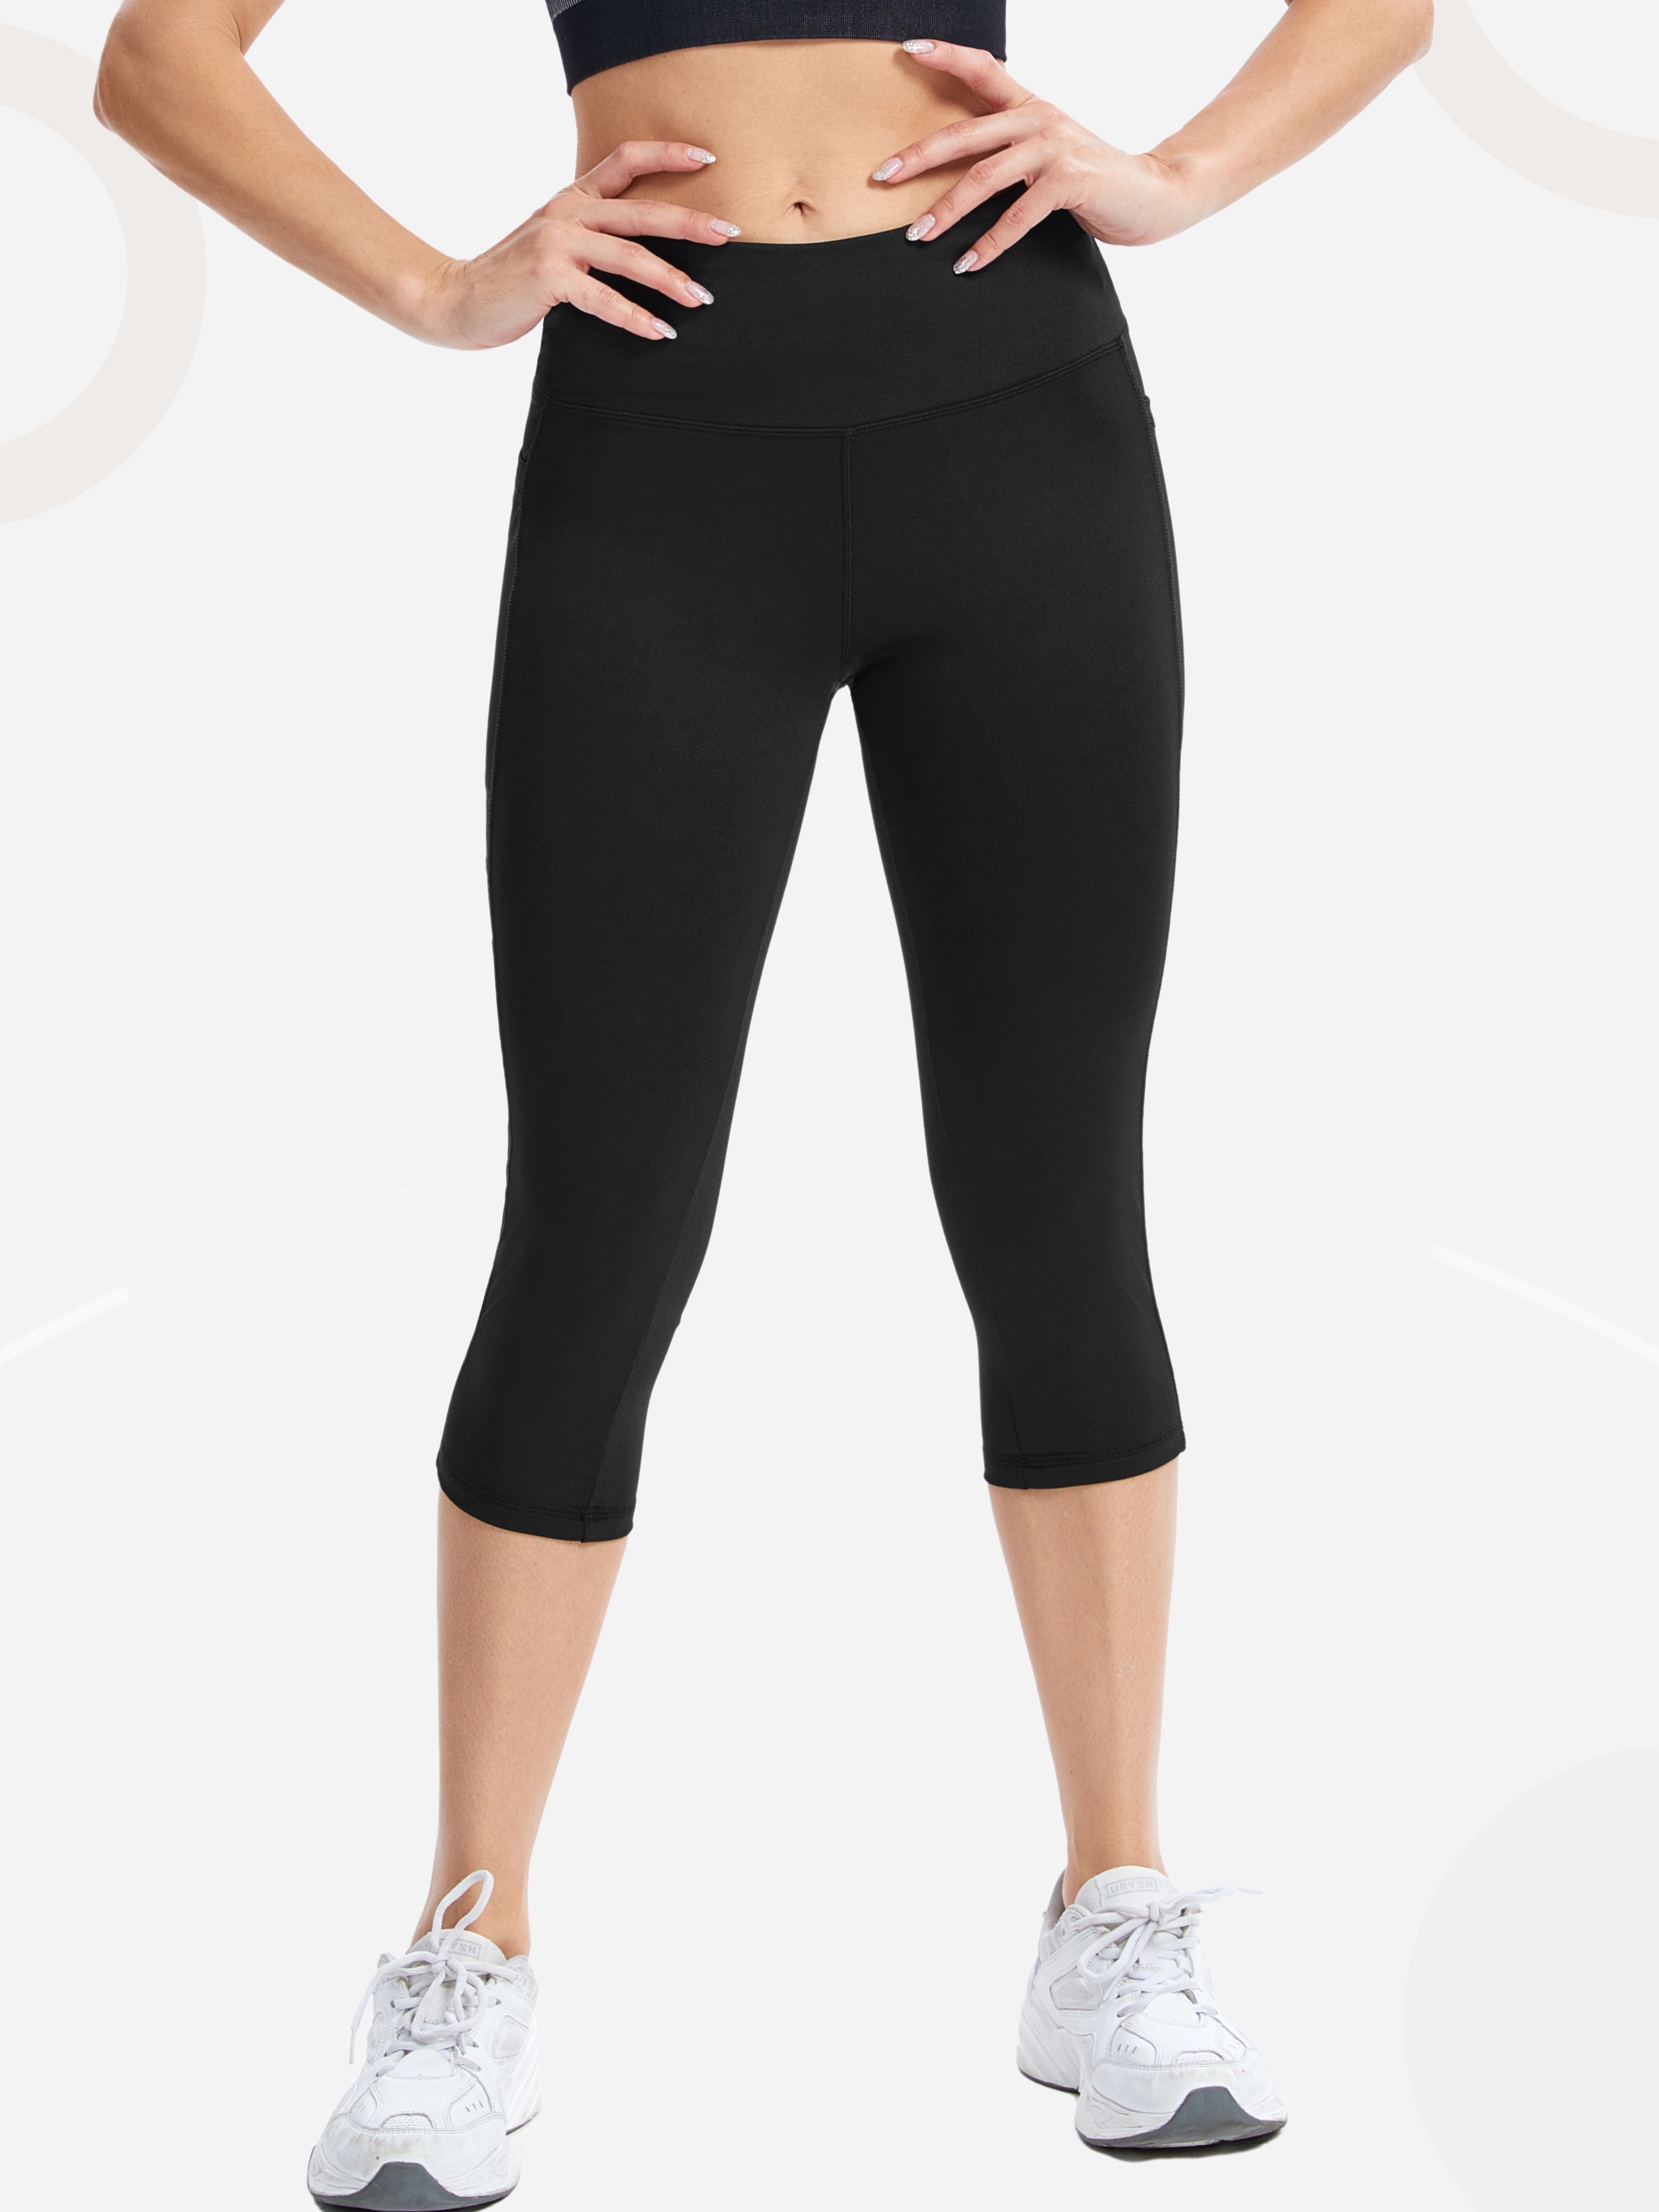 Capri Workout Leggings With Pockets For Women Tummy Control High Waisted  Yoga Pants, Women's Activewear